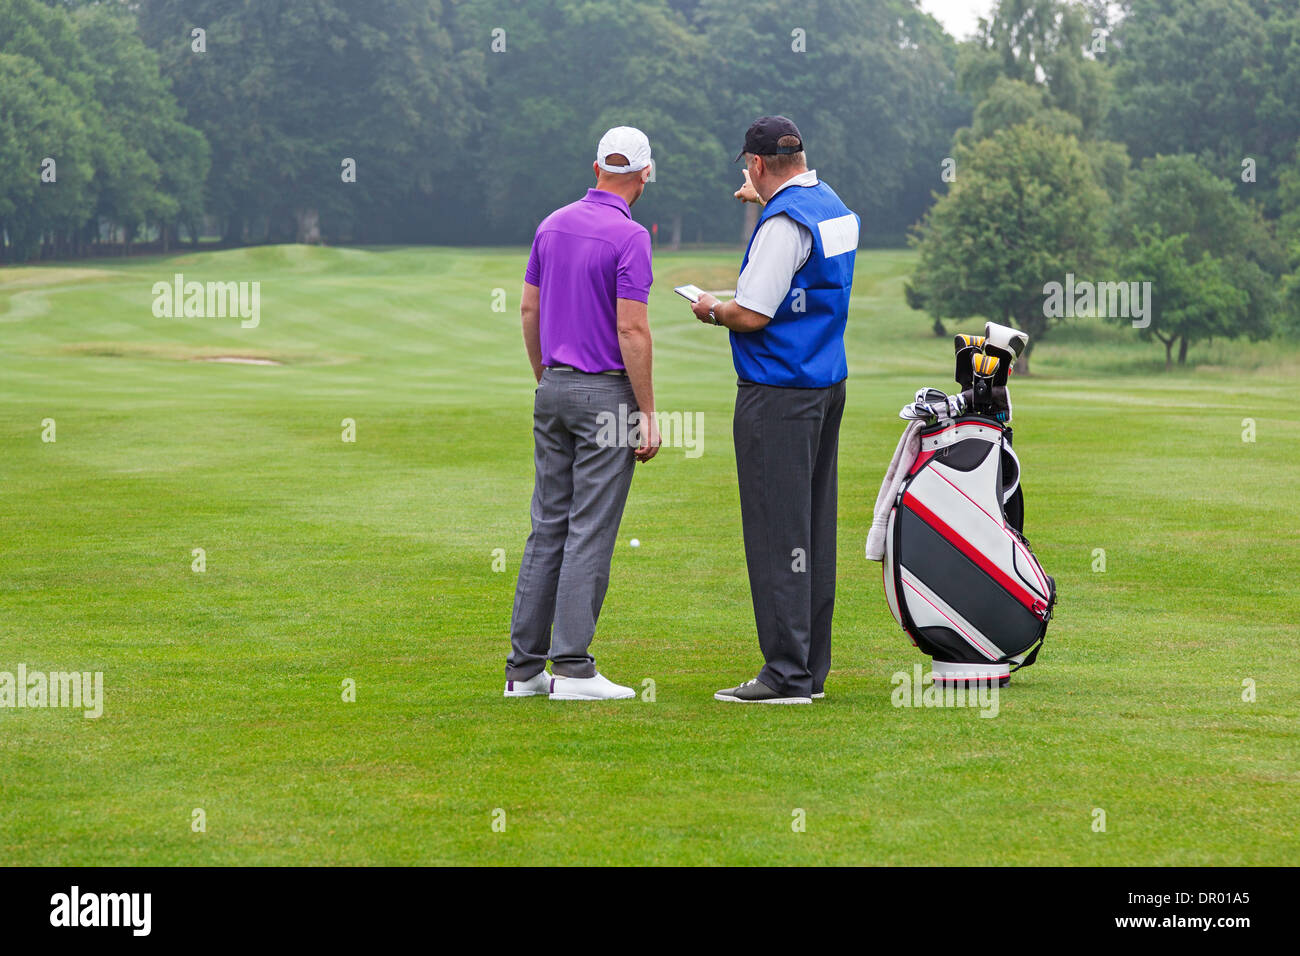 Caddy pointing out a hazard to the golfer on a par 4 fairway Stock Photo